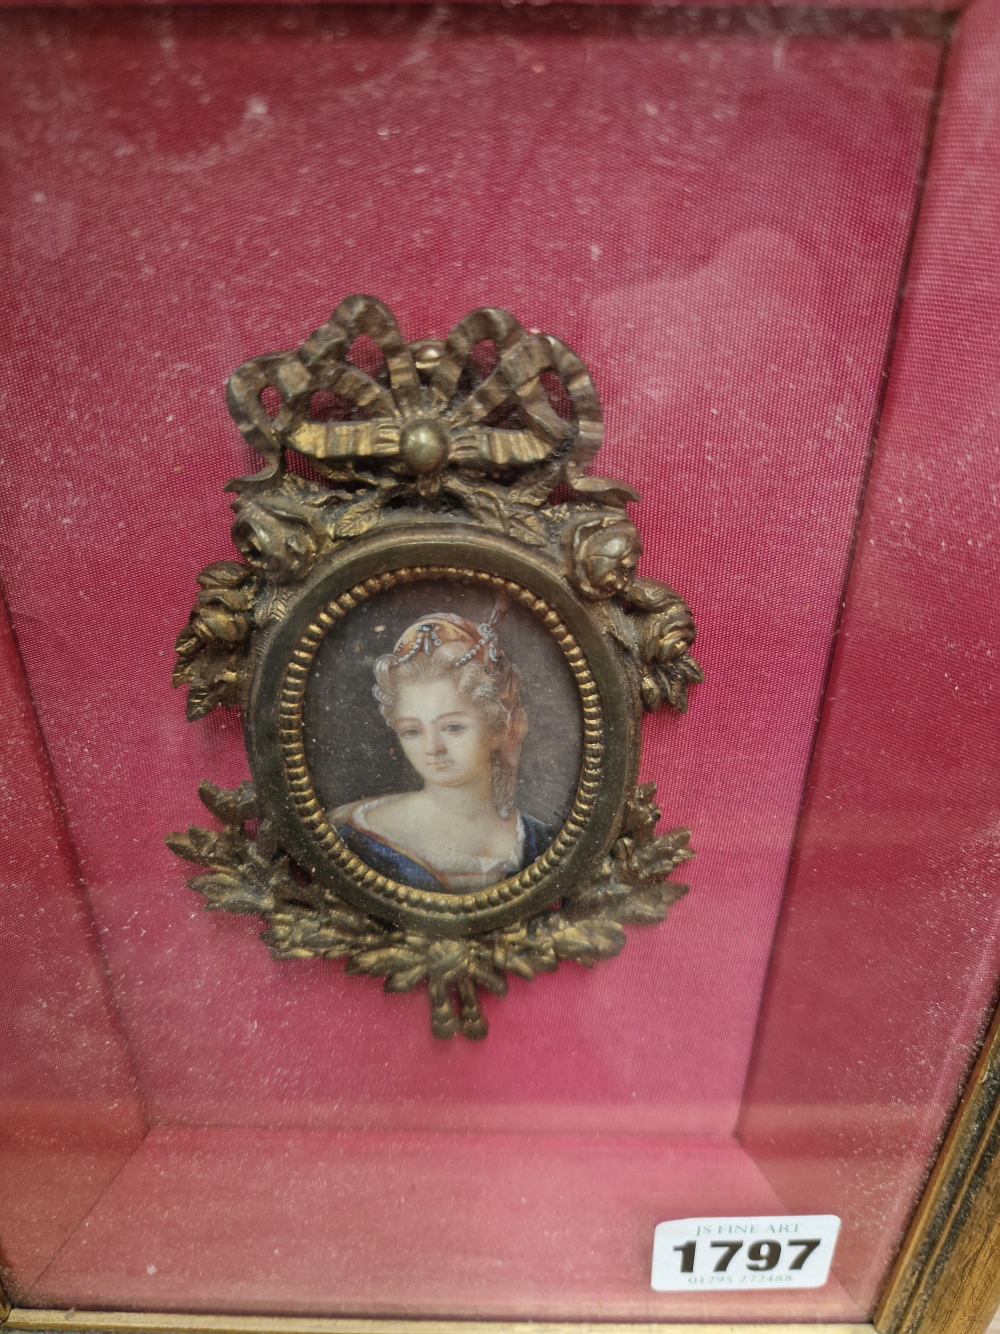 A DECORATIVE MINIATURE PORTRAIT PAINTING OF A LADY IN 18th CENTURY DRESS. - Image 2 of 5